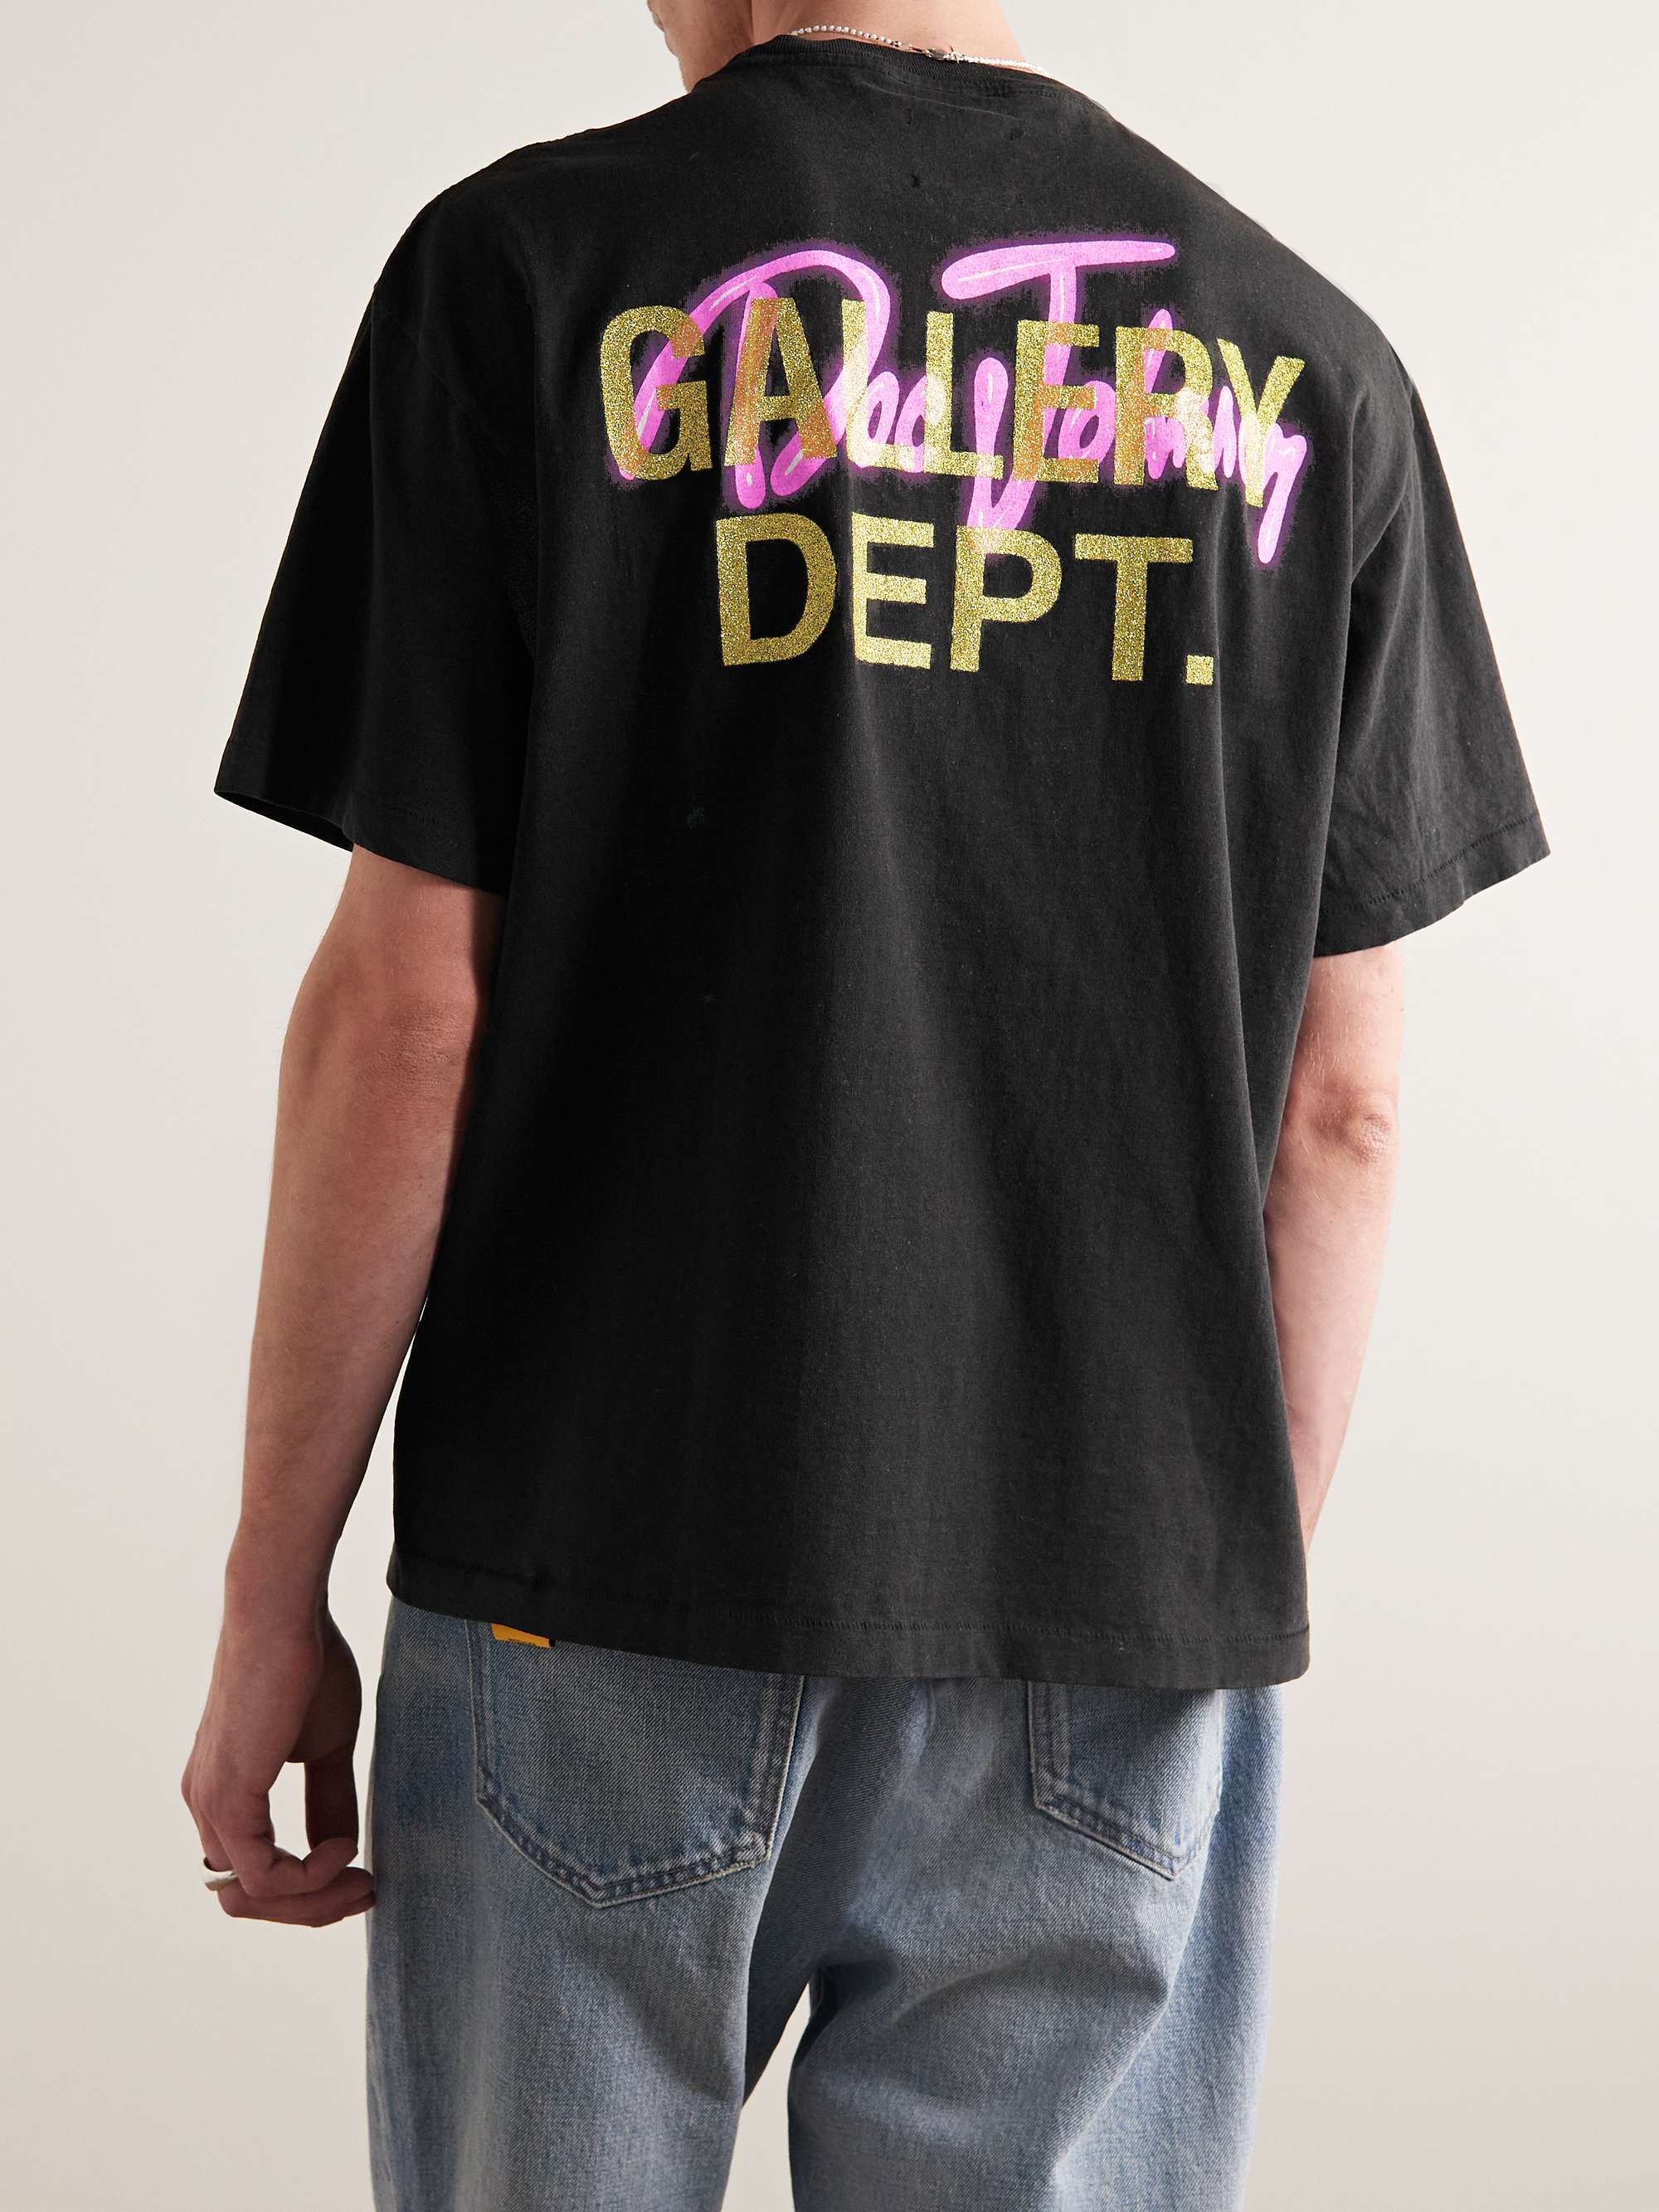 GALLERY DEPT. Printed Cotton-Jersey T-Shirt